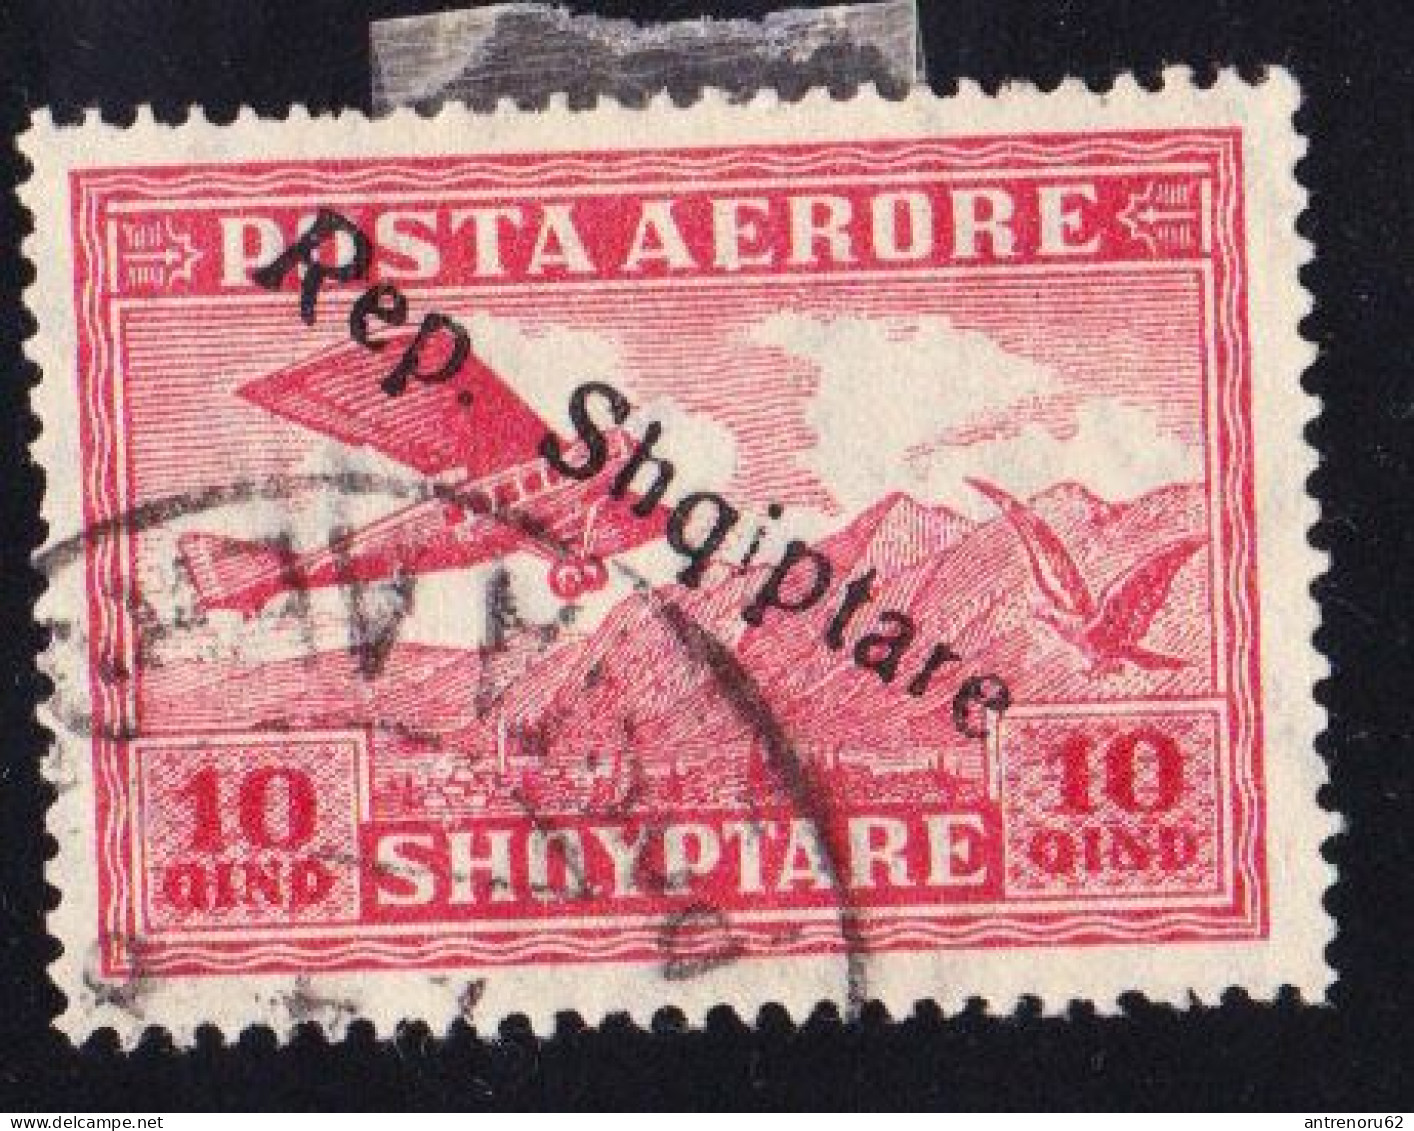 STAMPS-ALBANIA-1927-USED-SEE-SCAN - Albanie